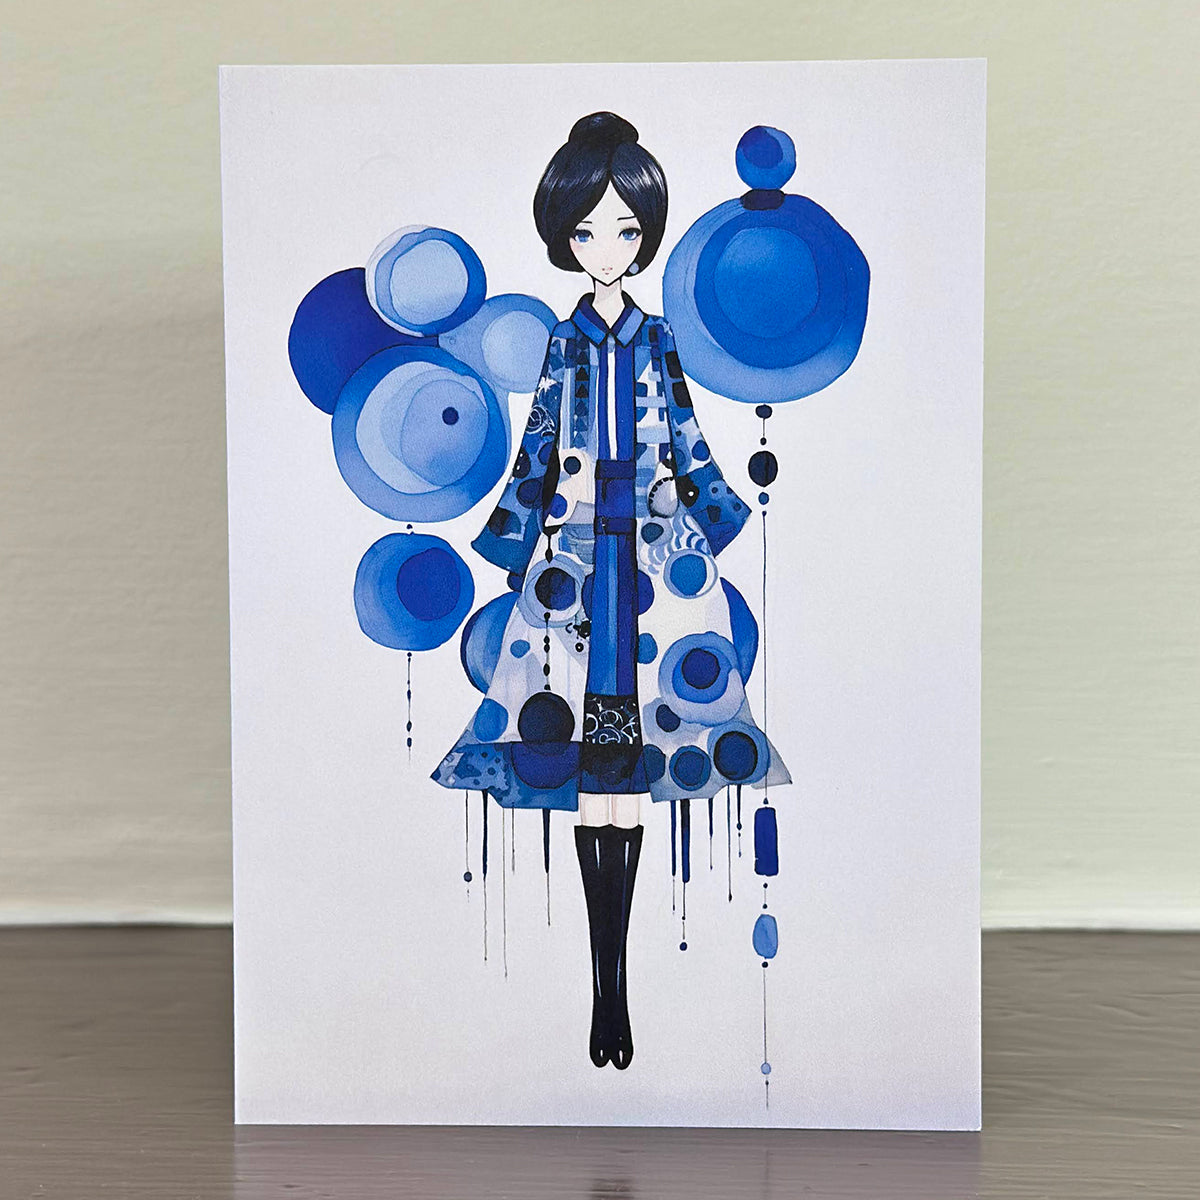 A Sweet Seasons greetings card, featuring a charming image of a girl in blue